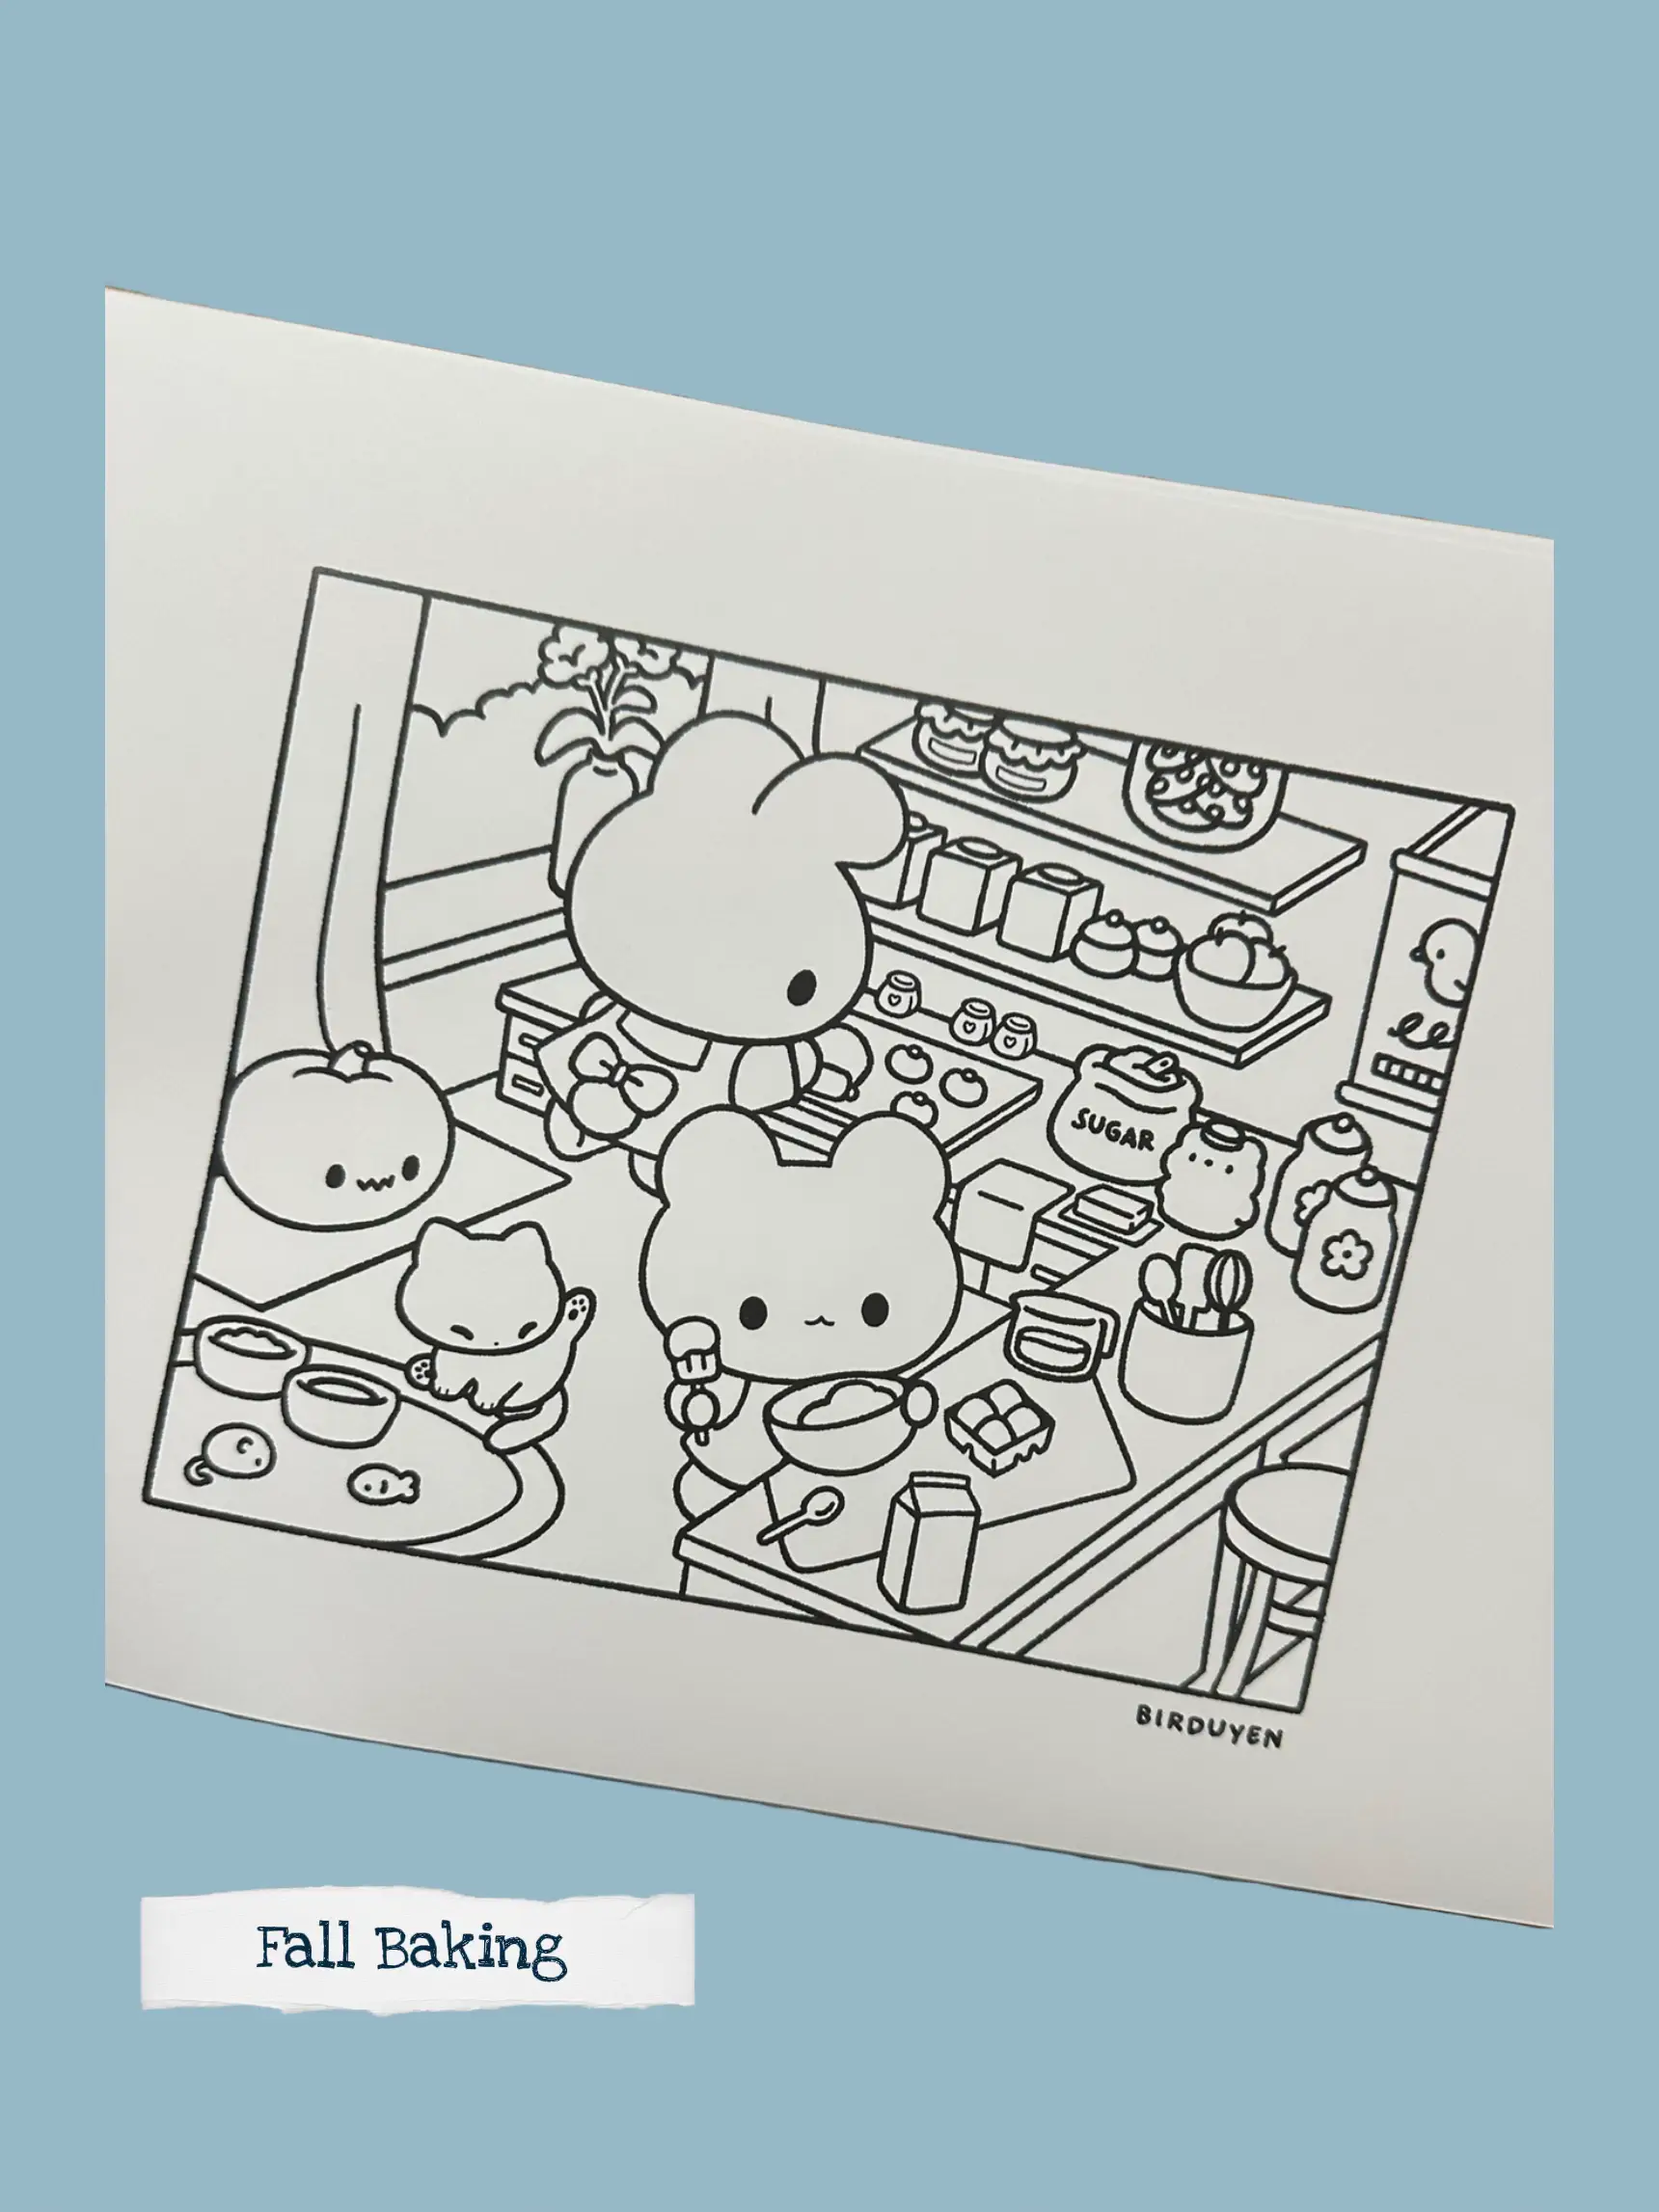 bobbie goods  Hello kitty colouring pages, Coloring book art